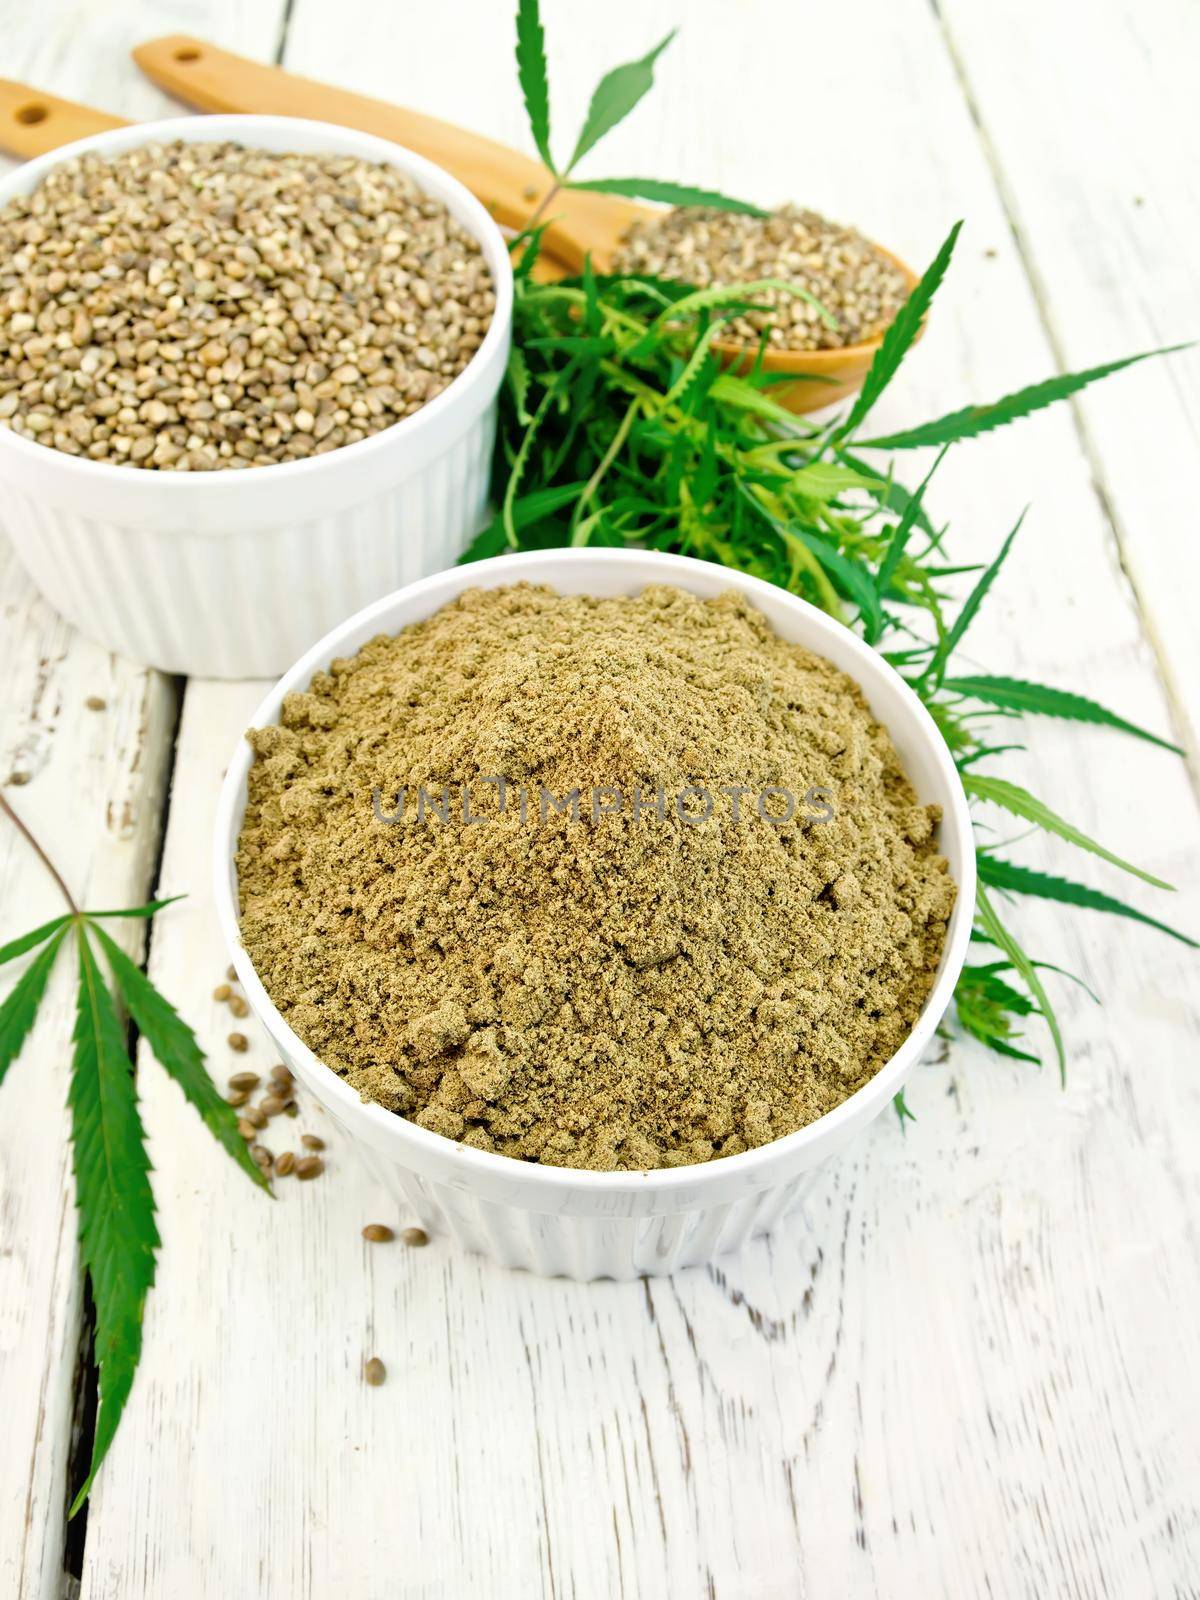 Flour and hemp grain in white bowl and spoon, cannabis leaves on the background of wooden boards